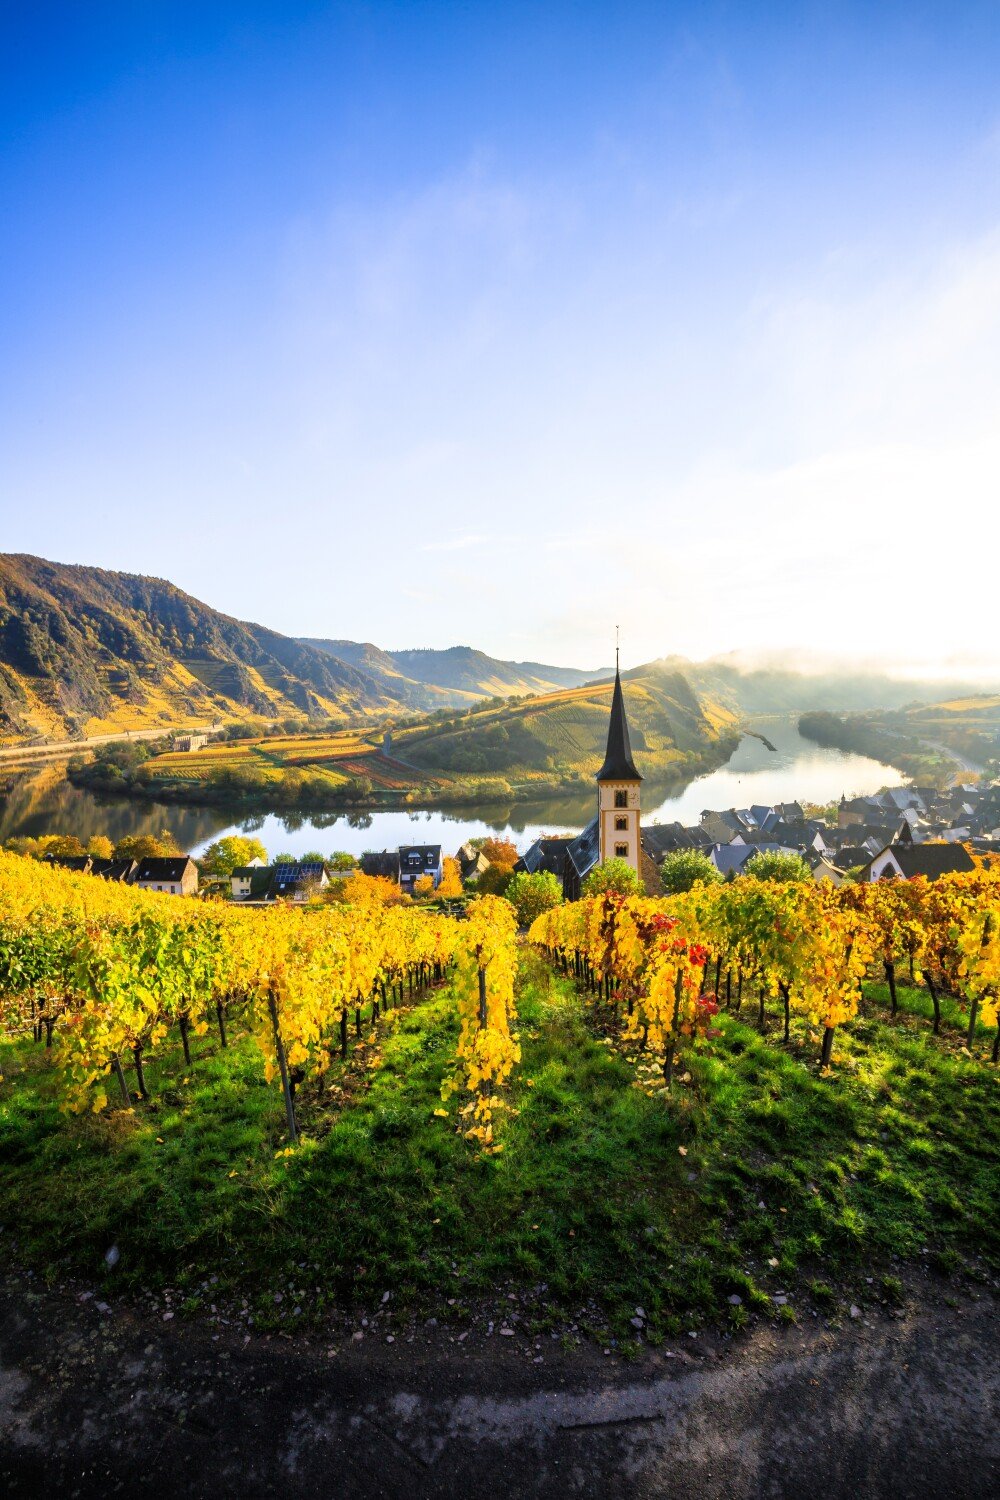 4. Why is the Scharzhofberger vineyard so famous?